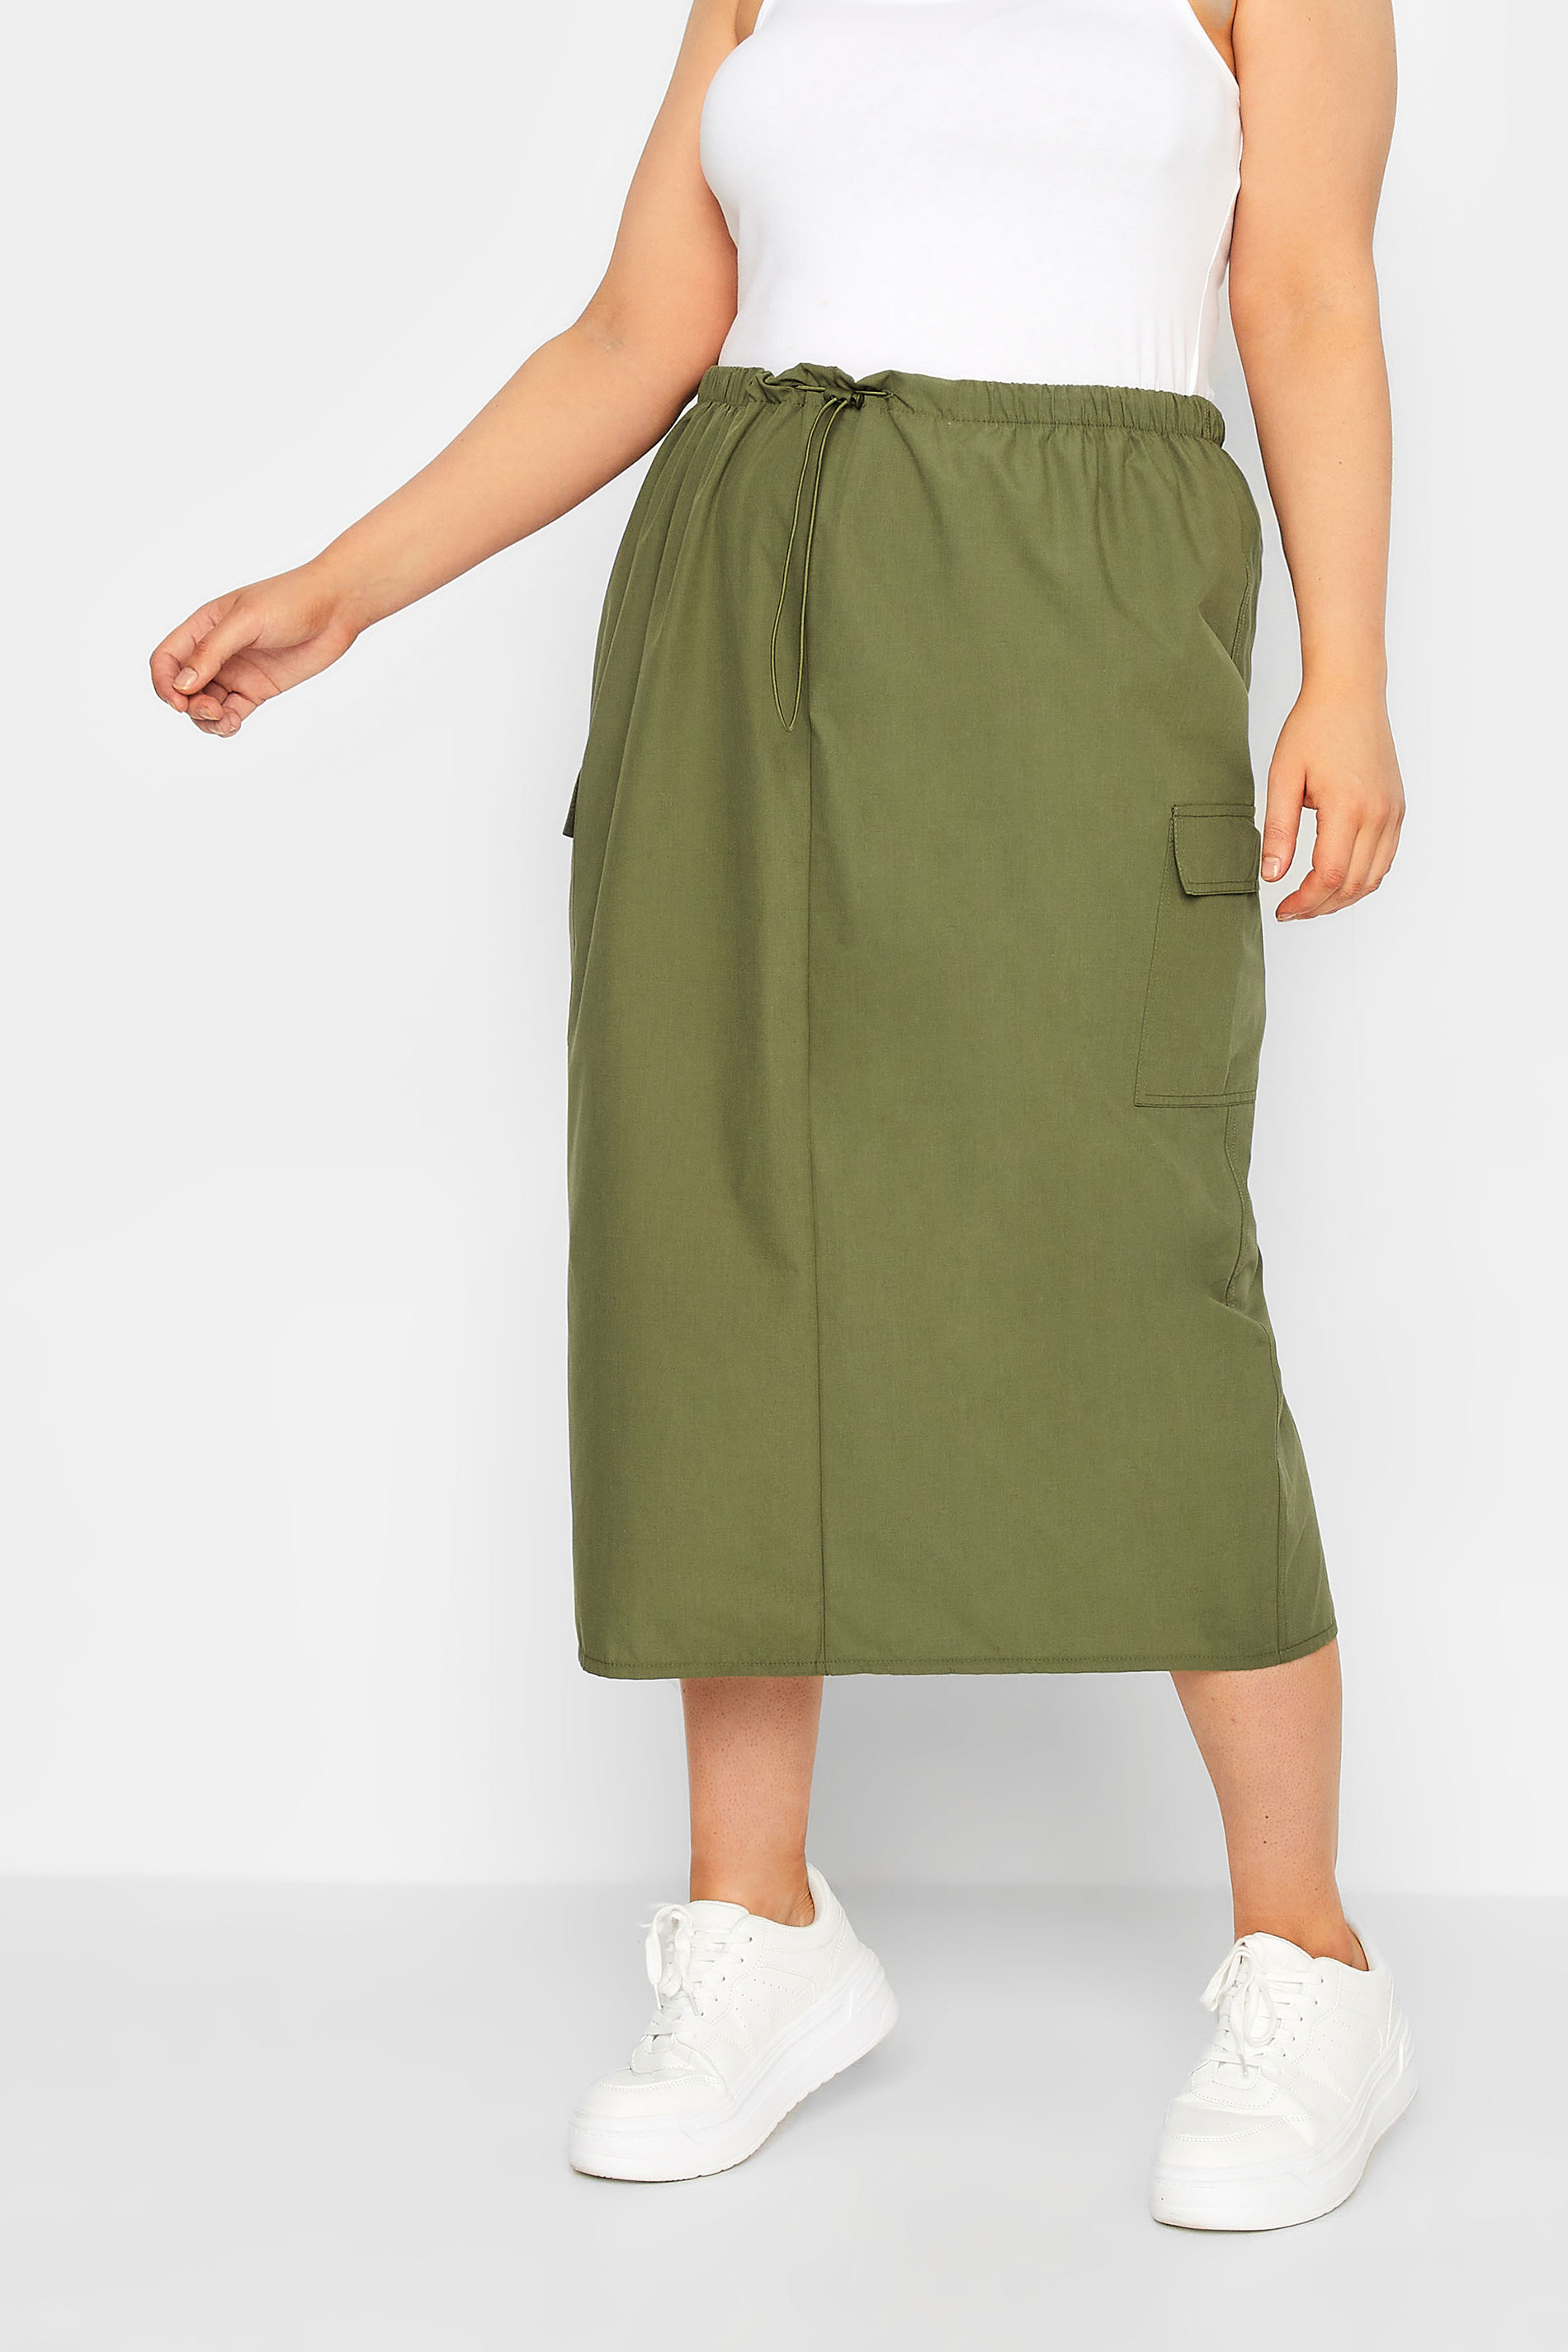 YOURS Plus Size Curve Khaki Green Cargo Skirt | Yours Clothing  1